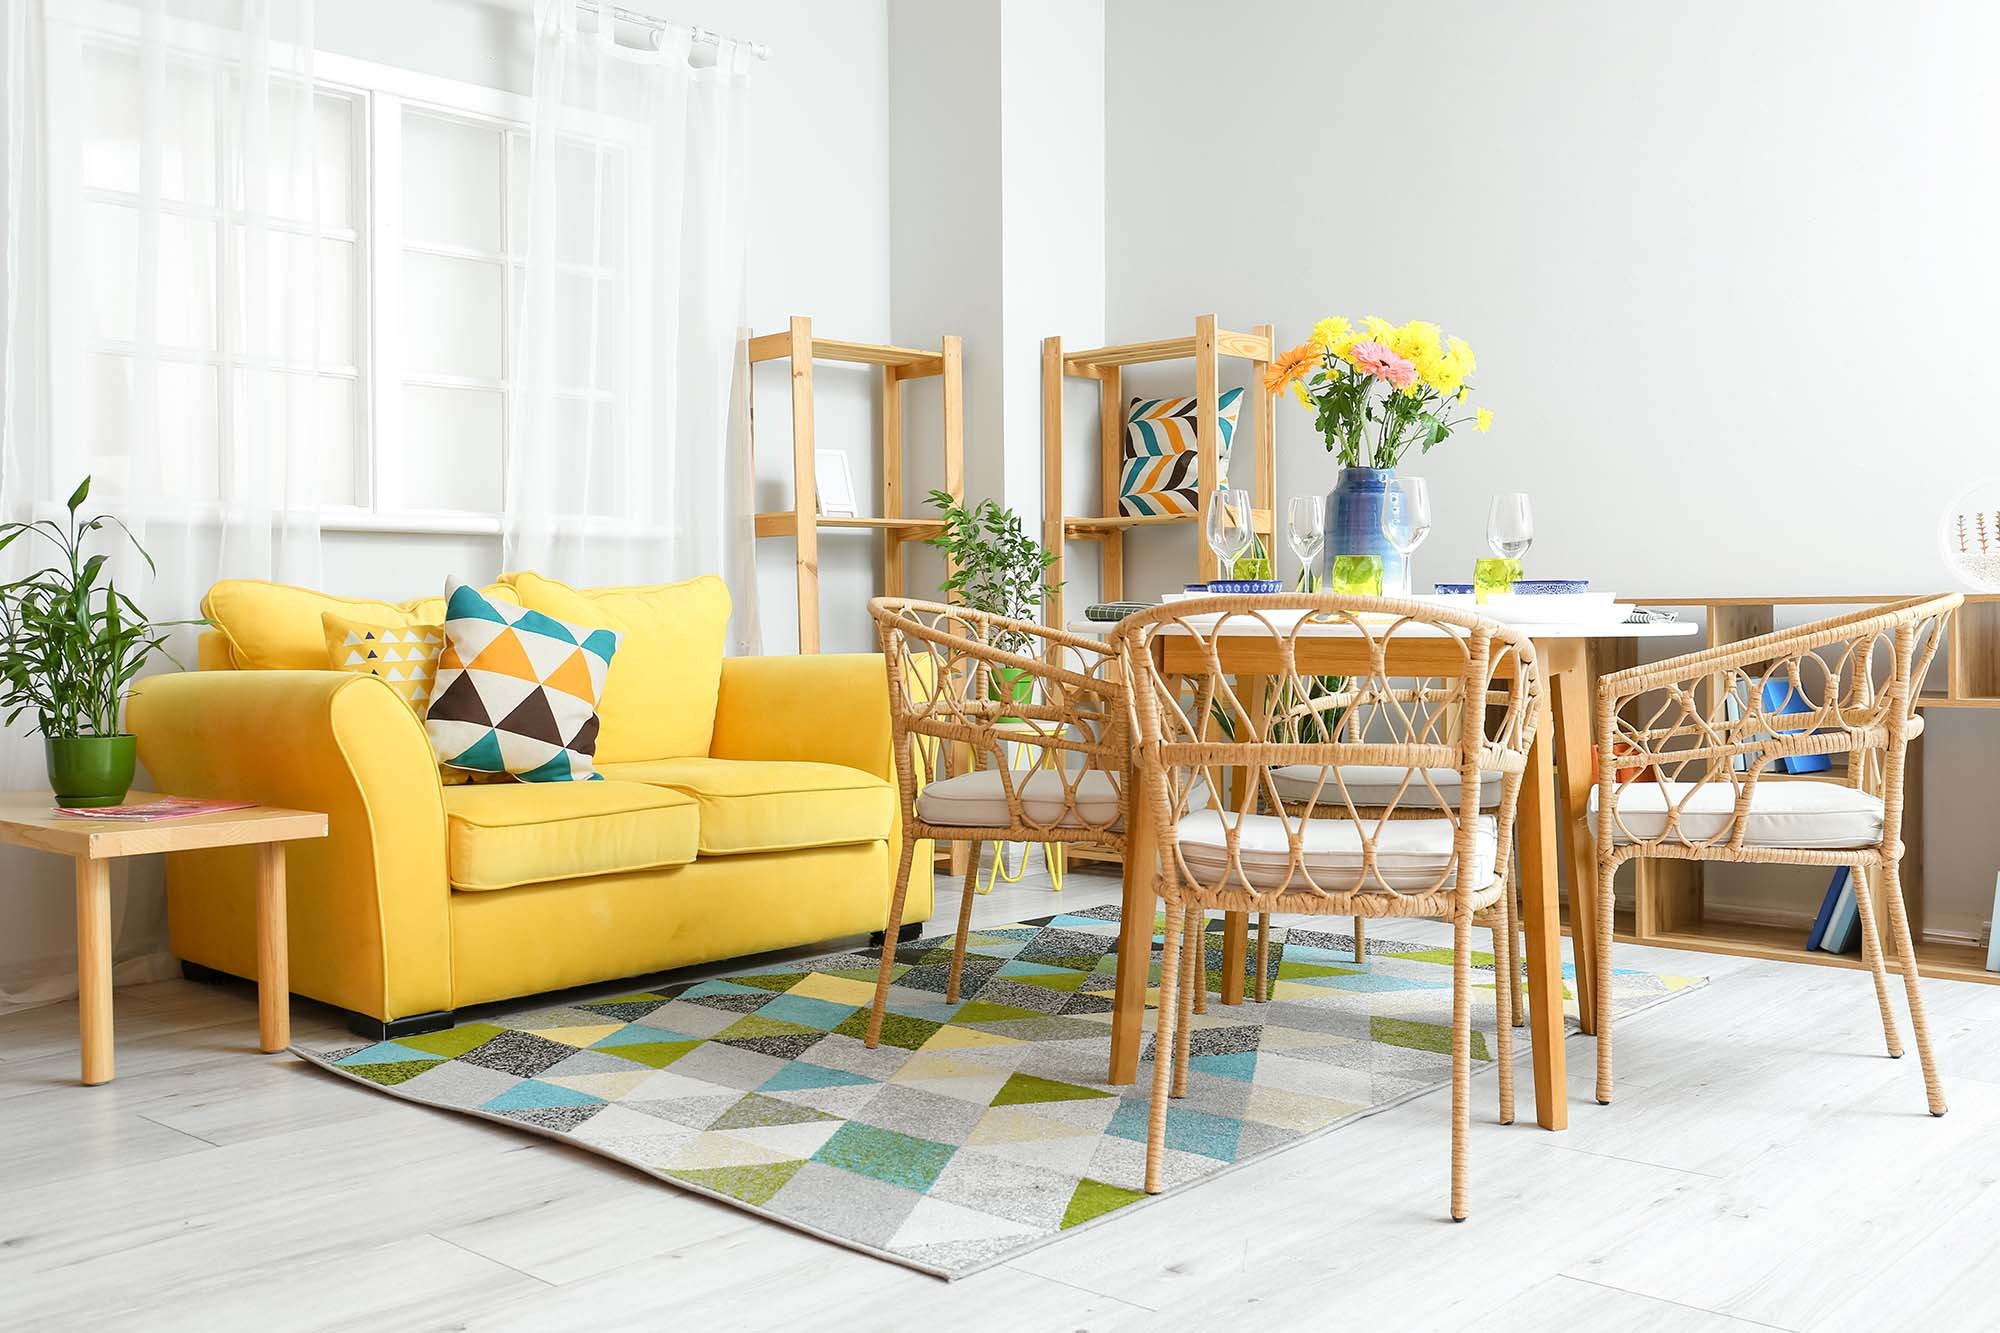 yellow couch and brown chairs and coffee table on a colorful patterned area rug from Henson's Greater Tennessee Flooring in Knoxville TN